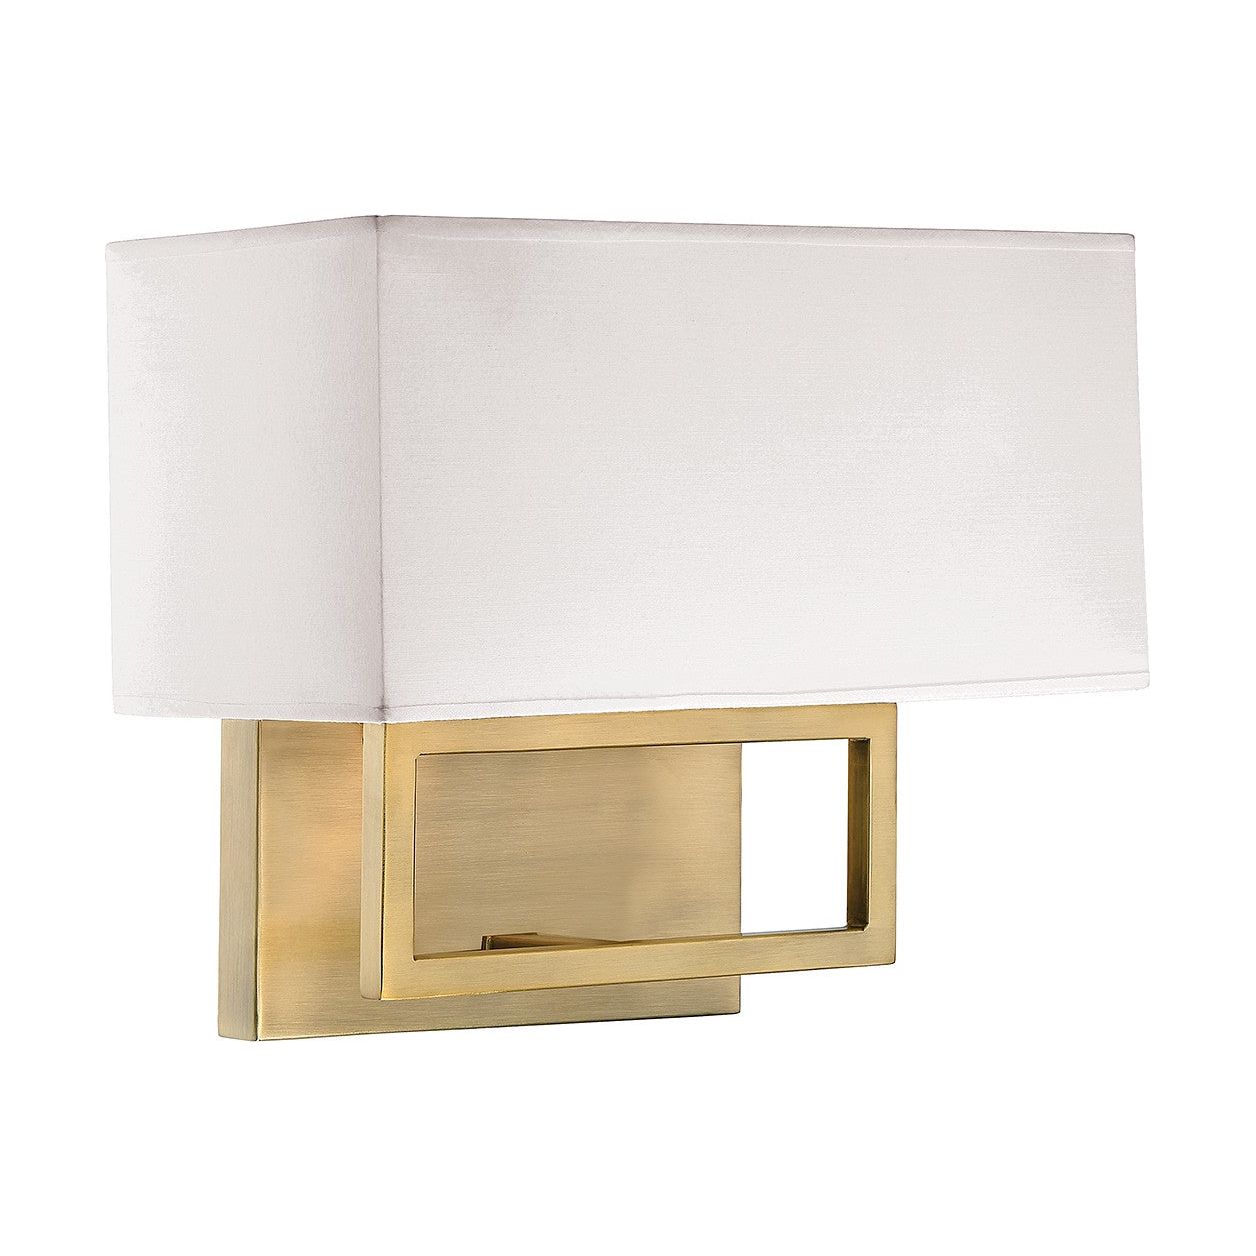 Meridian - M90095NB - Two Light Wall Sconce - Natural Brass